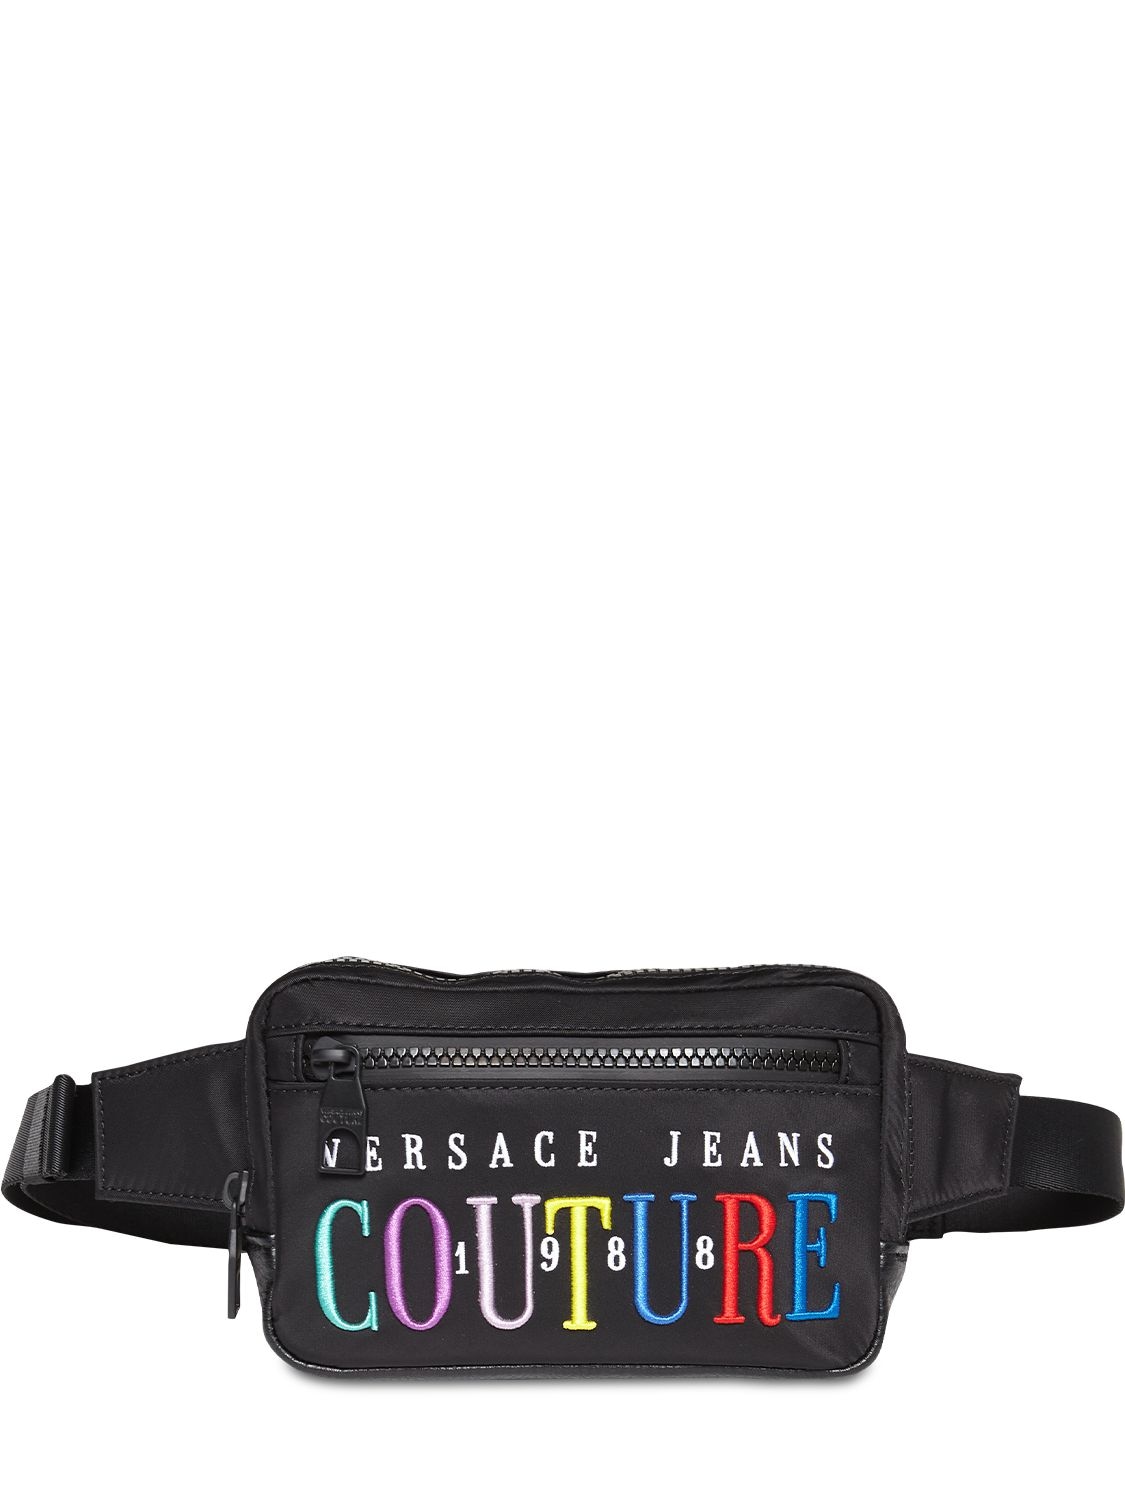 VERSACE JEANS COUTURE Bags for Men | ModeSens